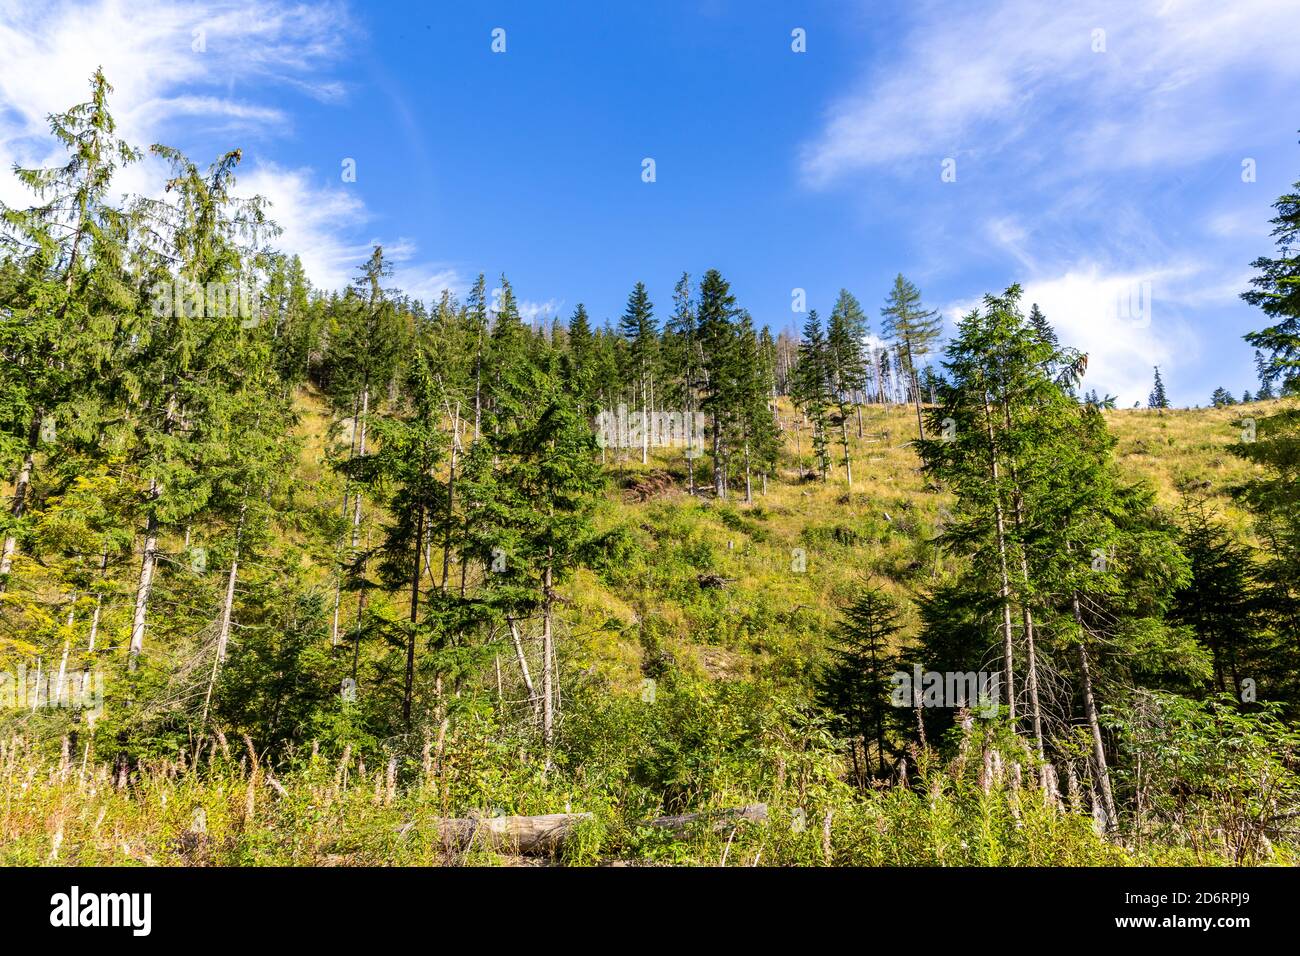 Coniferous forest with pine trees and spruces on a green hill in Lejowa Valley Tatra Mountains, Poland. Stock Photo